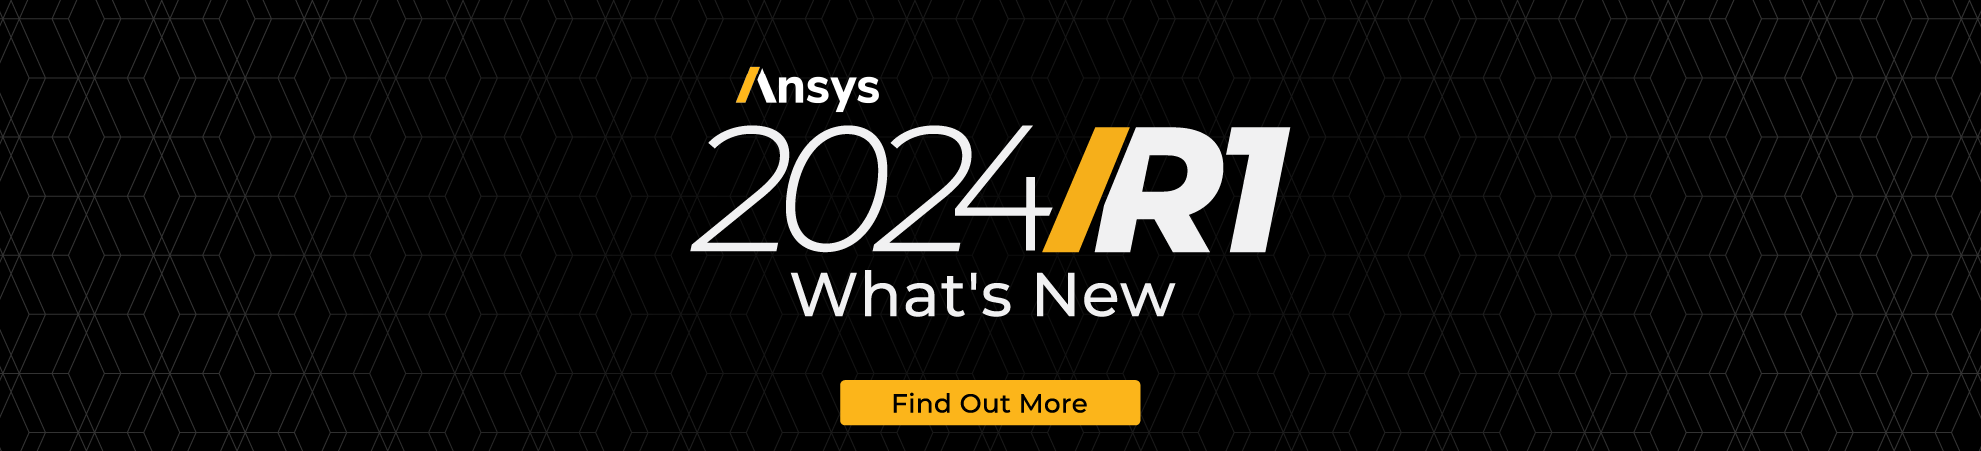 Ansys 2024R1 - What's New!